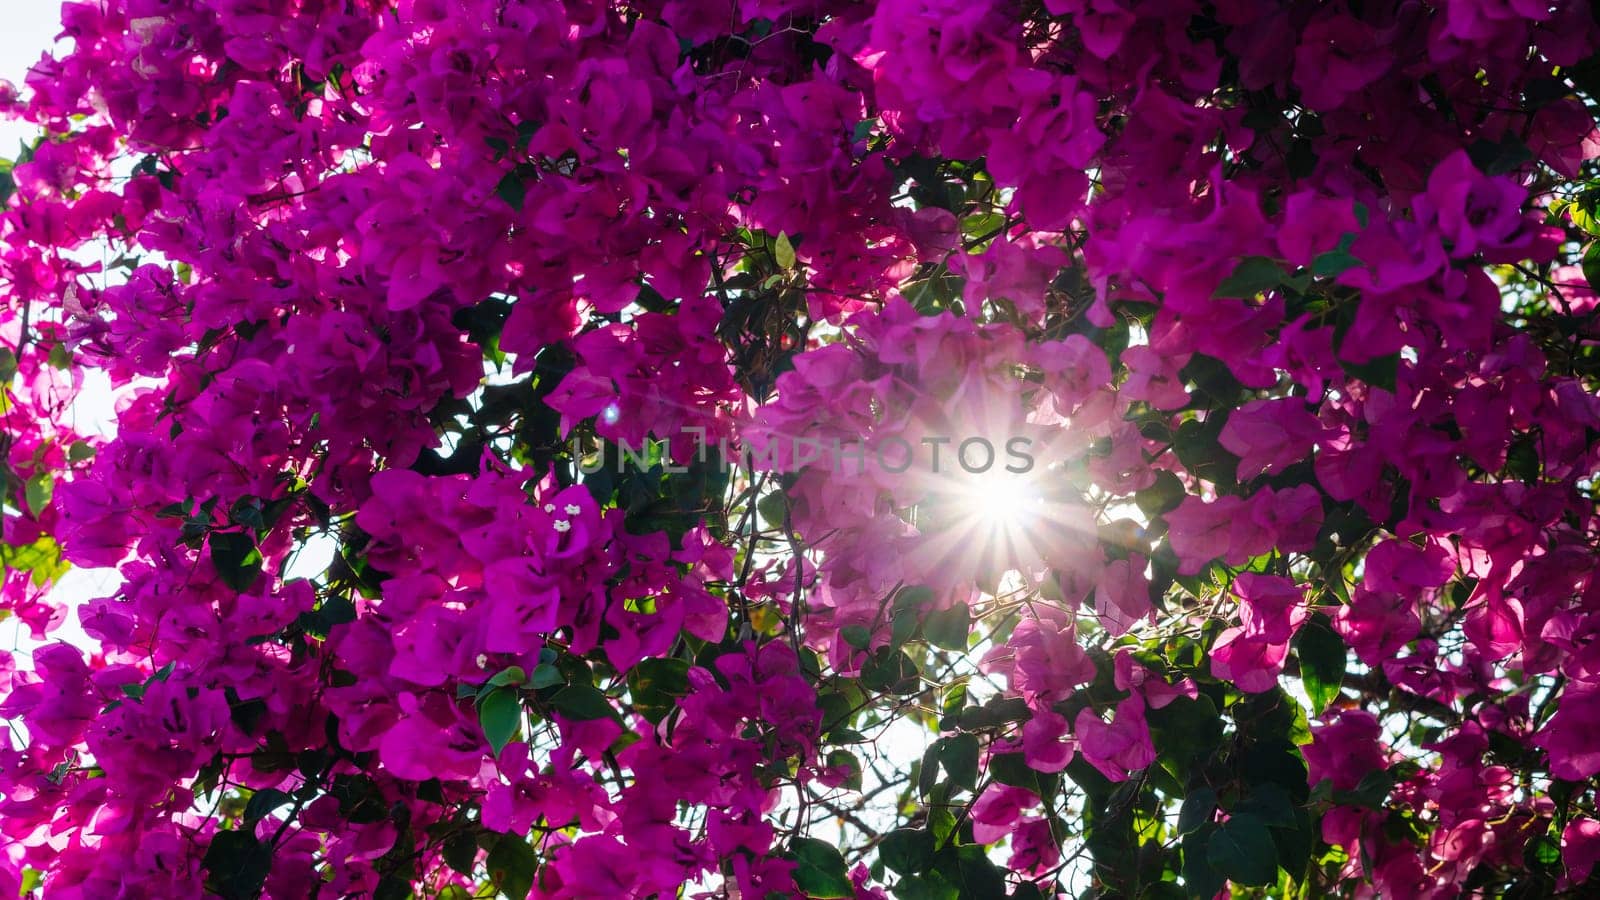 Bougainvillea flowers in the sunlight rays of the sun through foliage petals pink dawn.